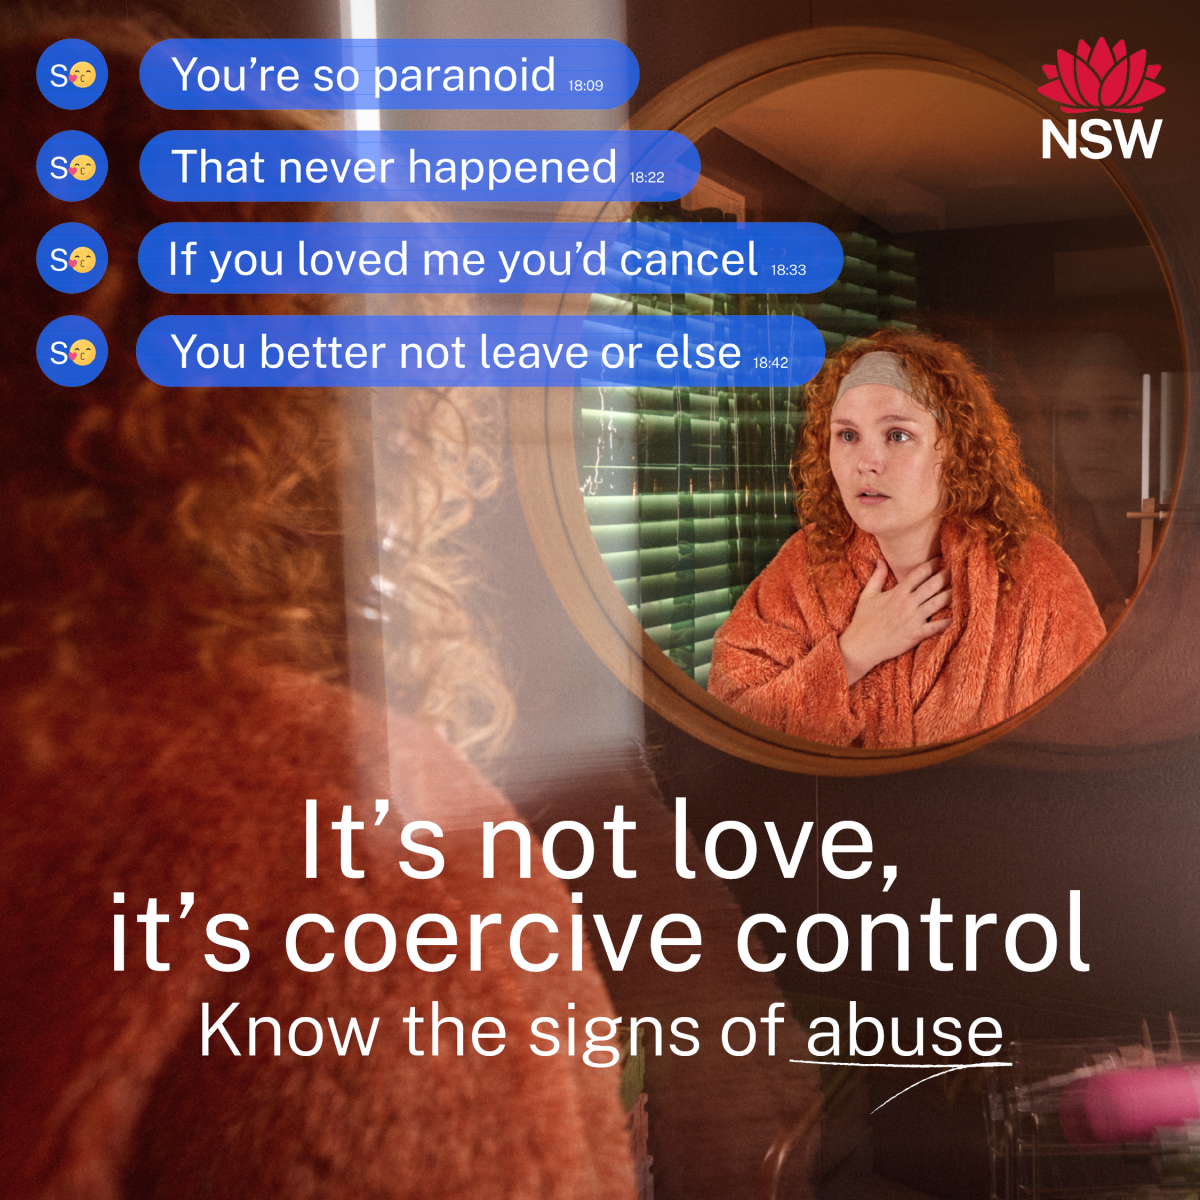 The NSW Government's statewide advertising campaign aims to increase awareness of coercive control. 